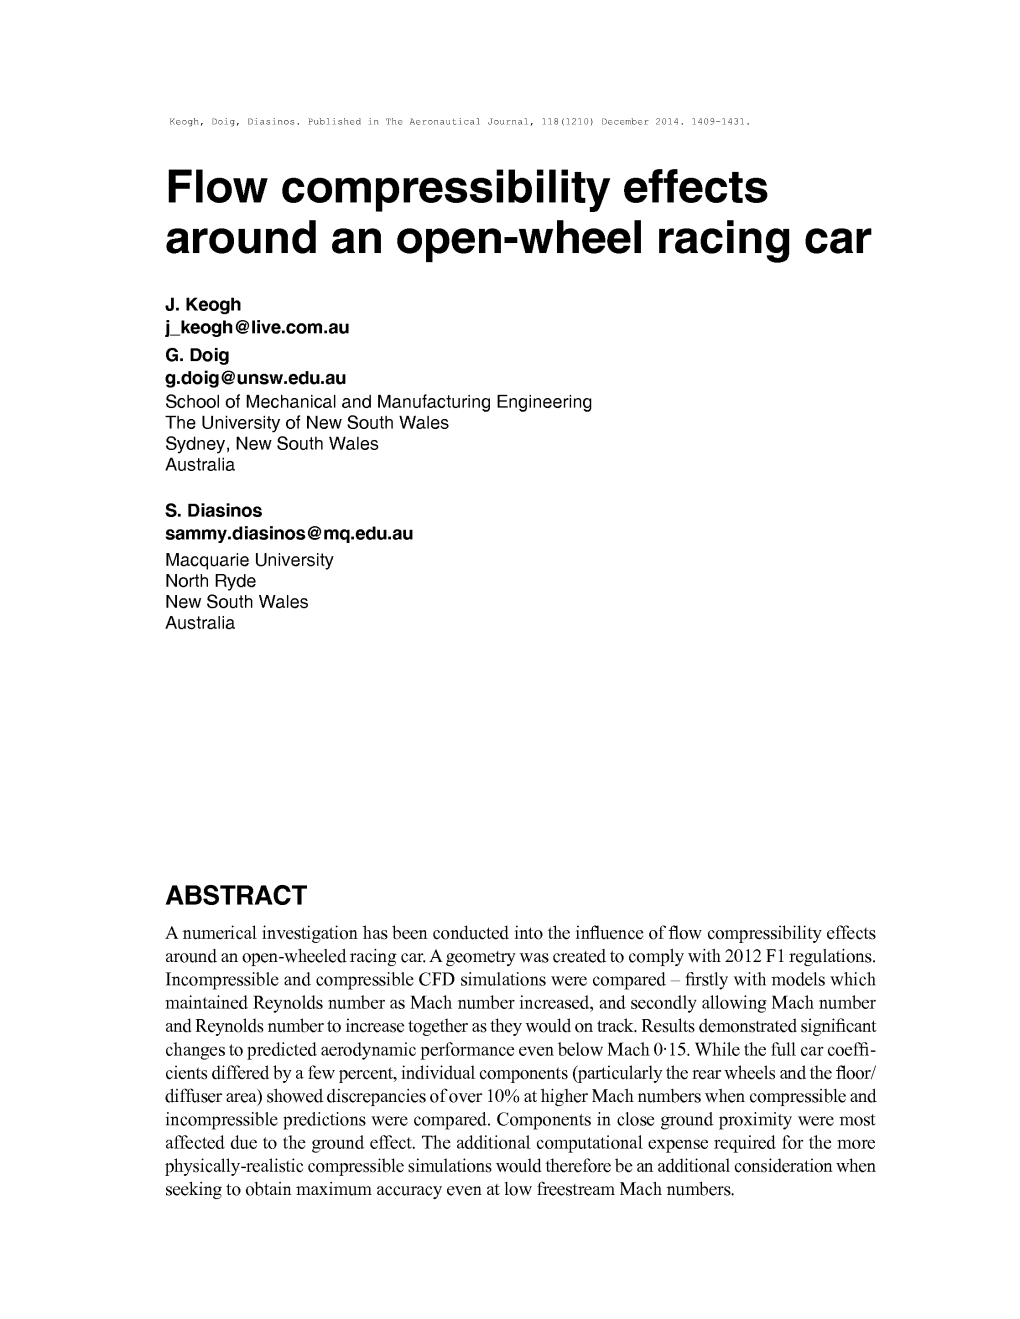 Flow Compressibility Effects Around an Open-Wheel Racing Car